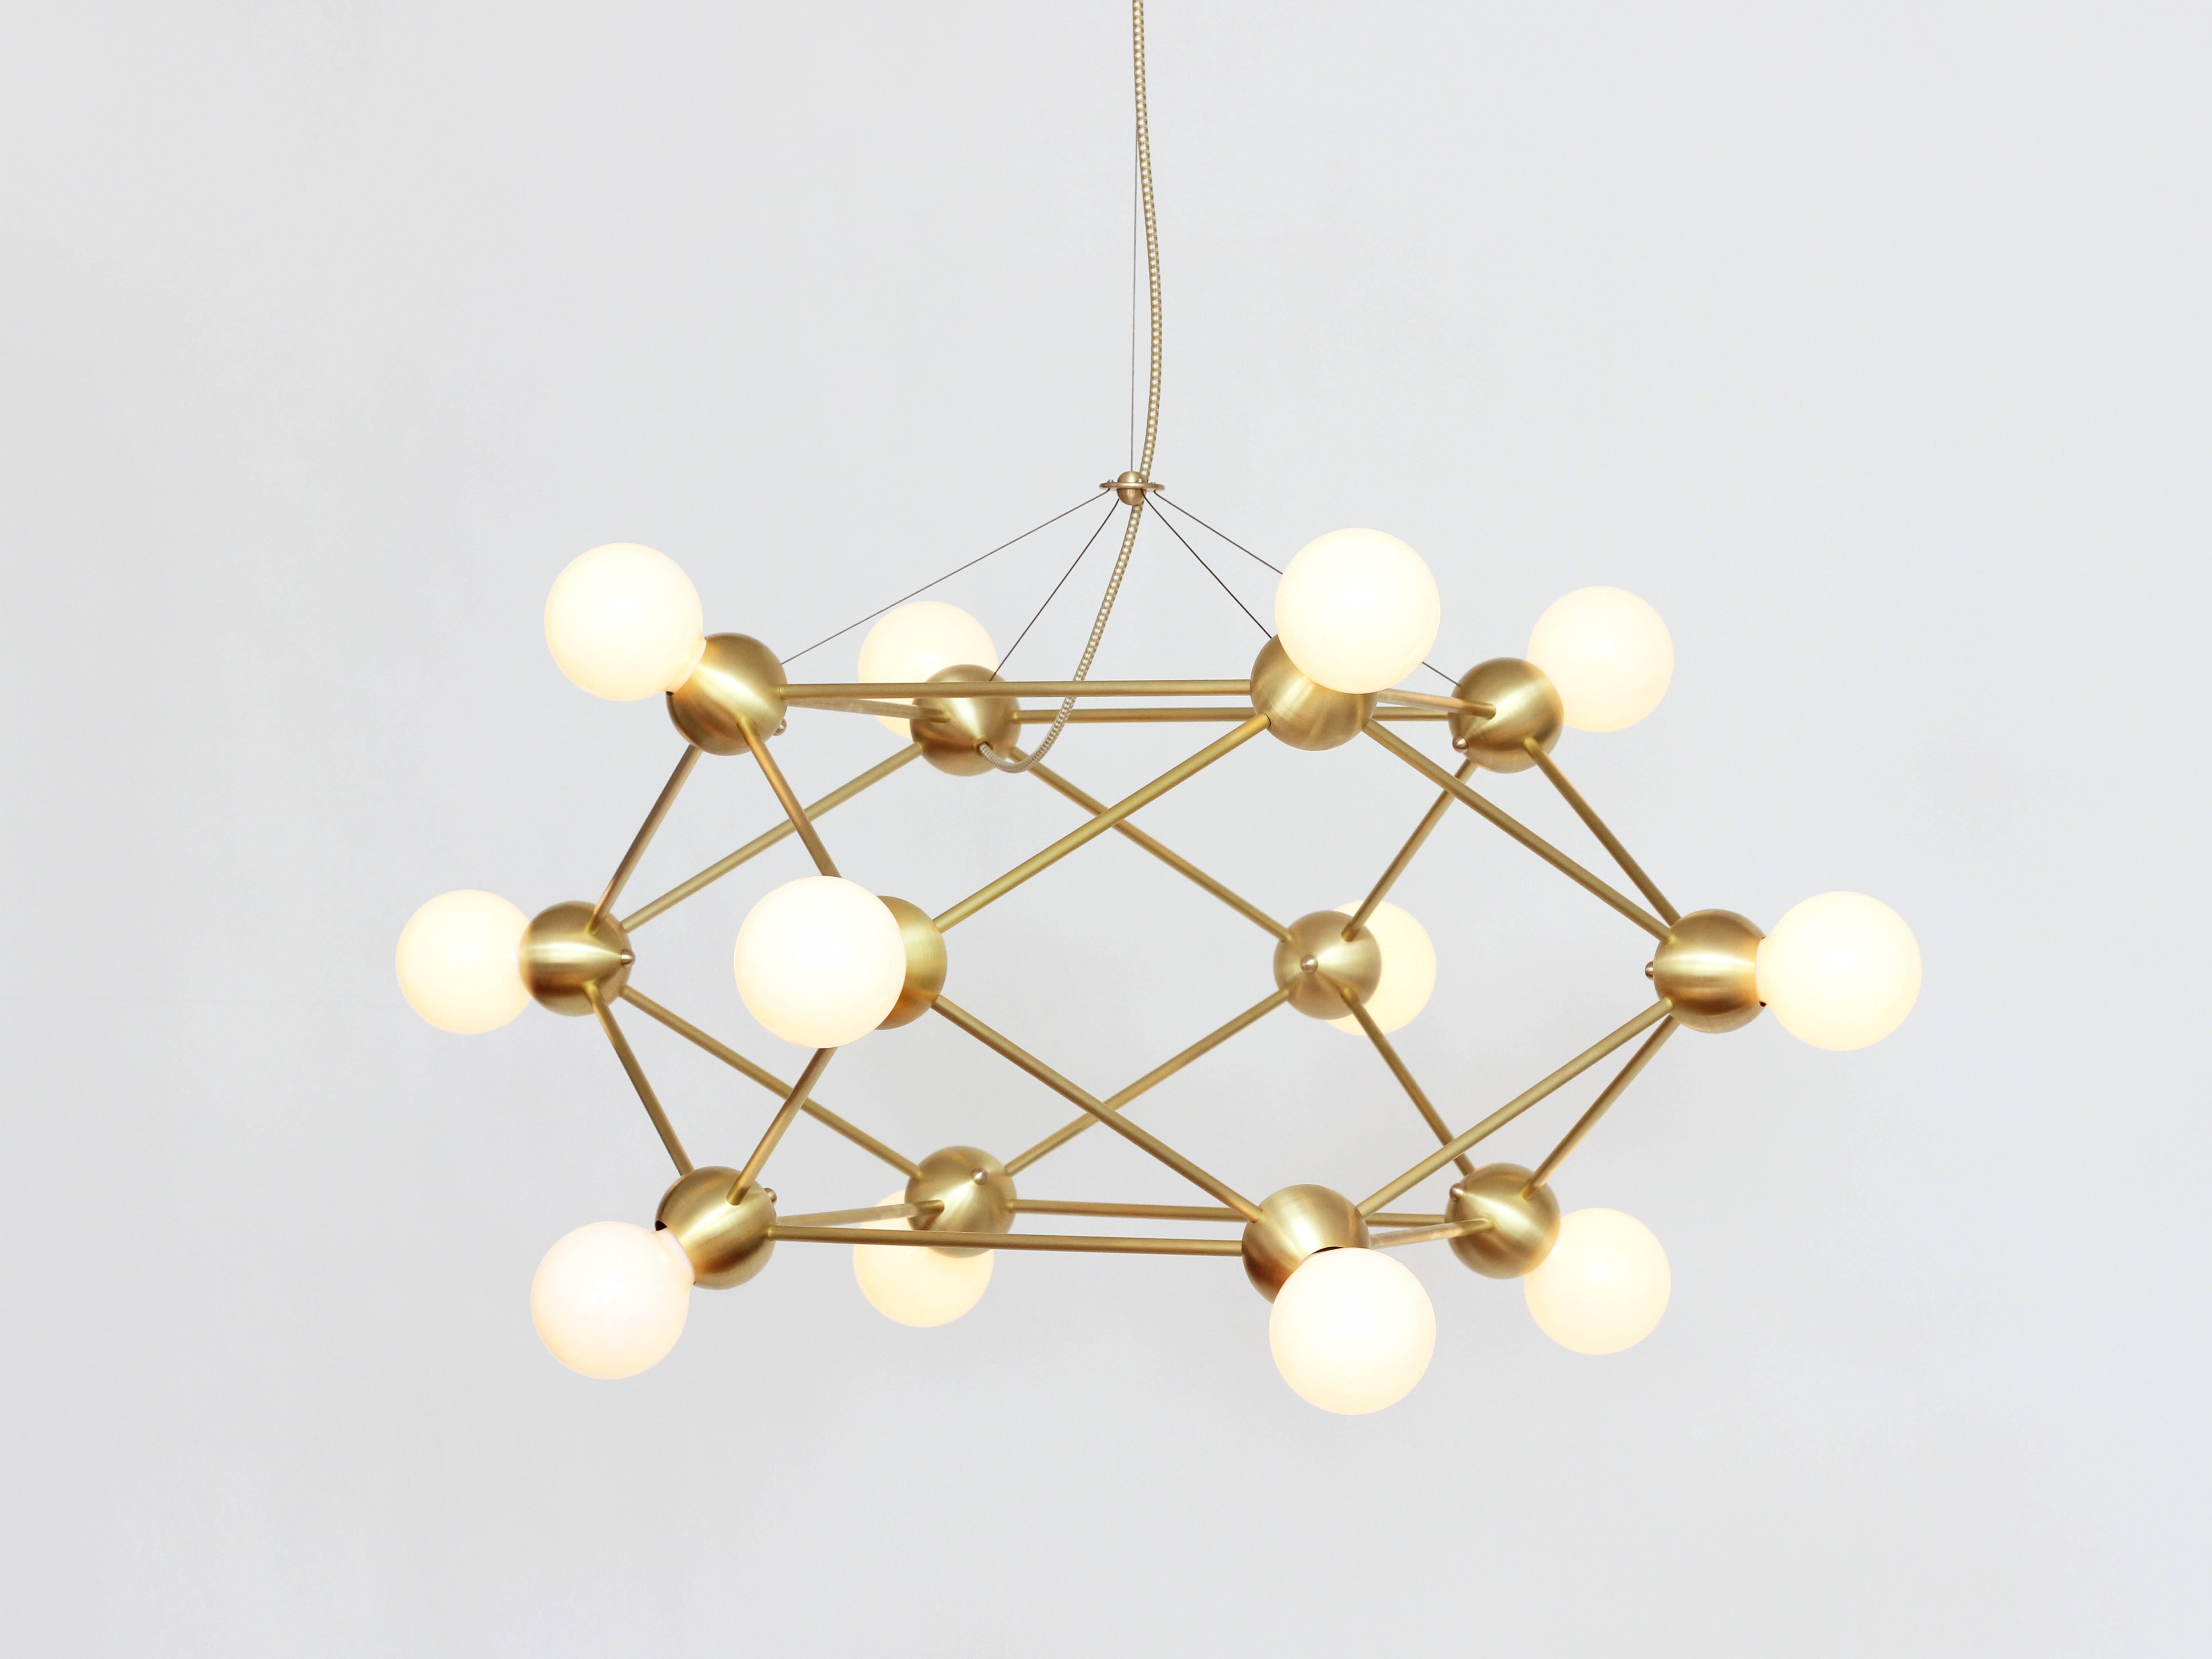 Inspired by 1960s Italian lighting, Lina is an all-brass lighting system designed to create airy geometric fixtures.

Each welded brass sphere joins with solid brass tubing and minimal fastener hardware to form strikingly simple hanging and